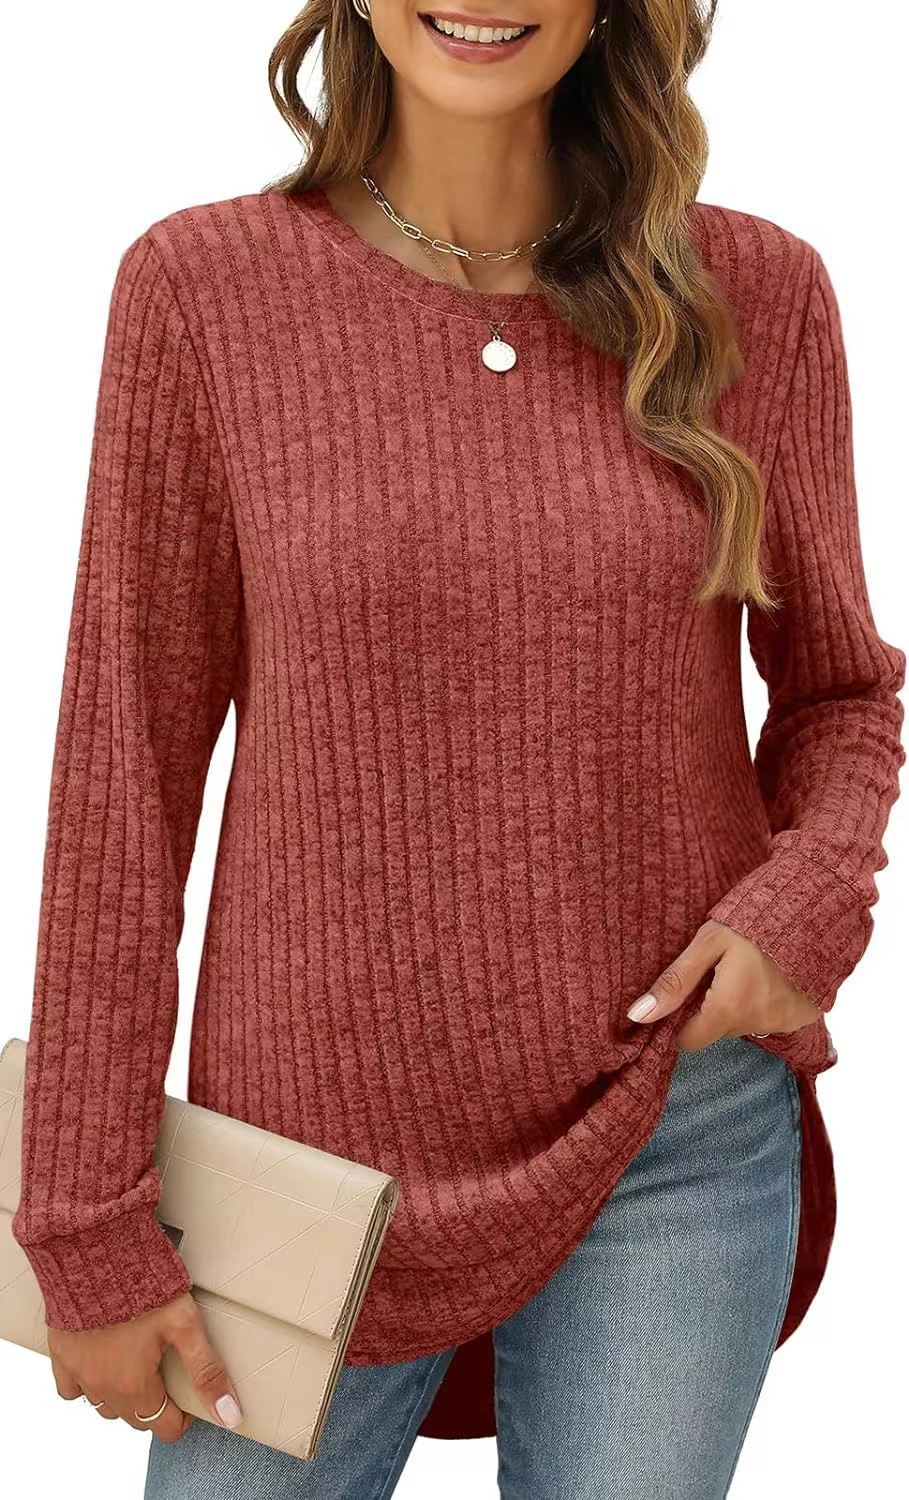 Autumn Winter Solid Color Round Neck Long Sleeve Brushed Loose Fitting T Shirt Top Women